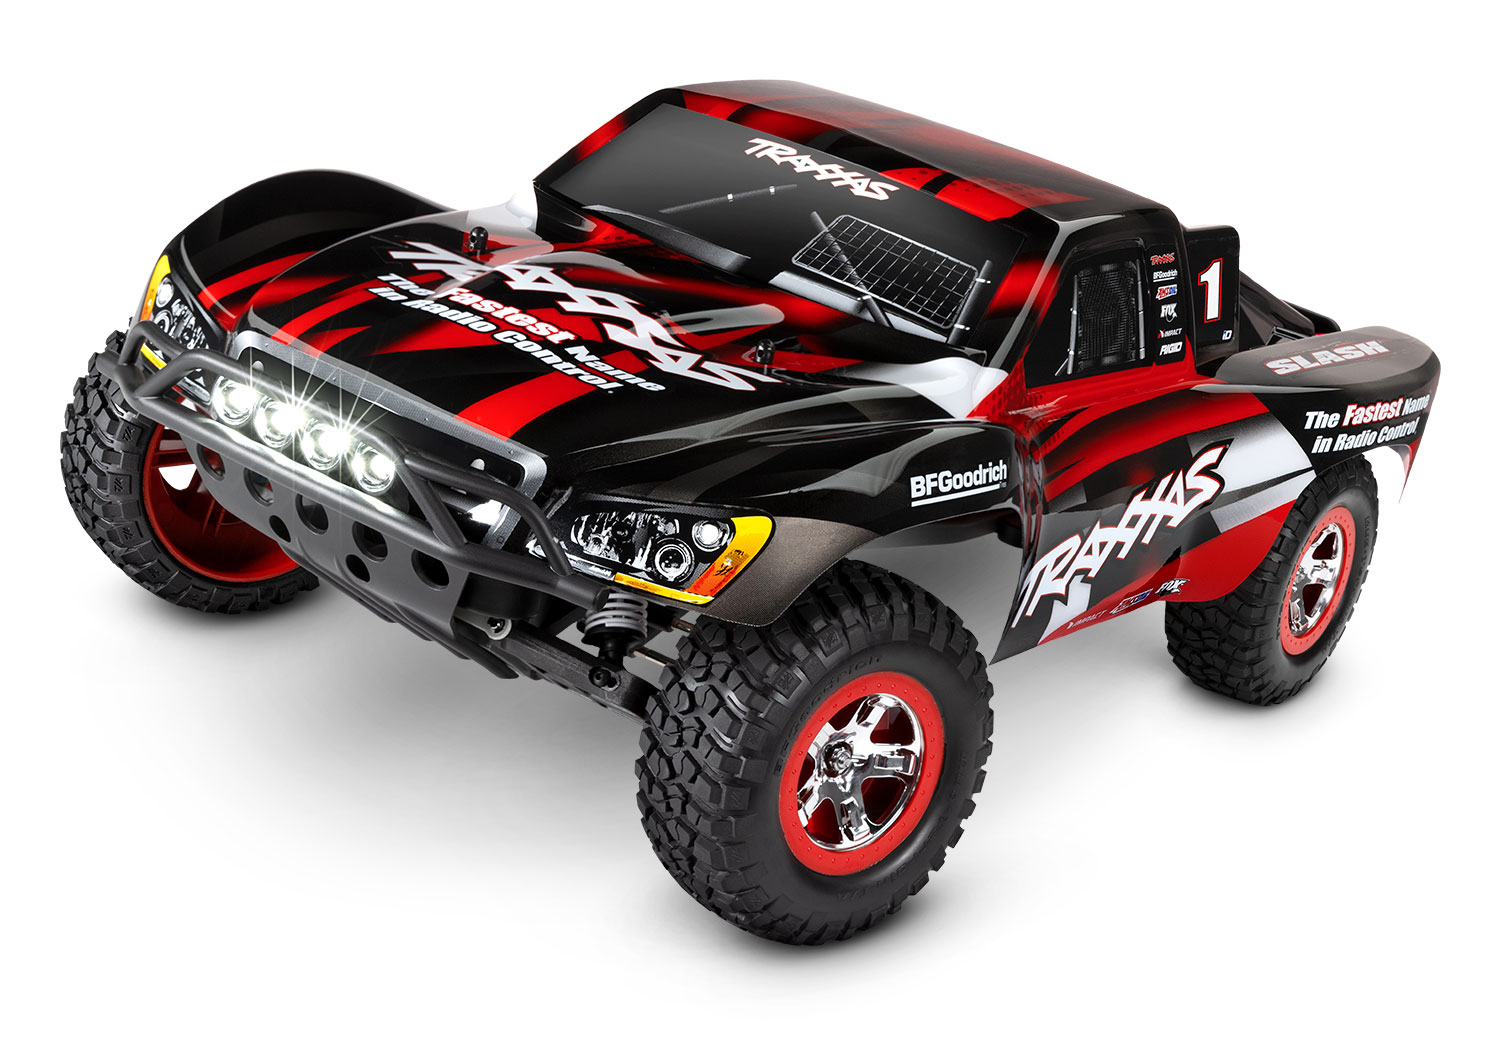 Traxxas Slash XL5 2WD short course truck RTR 2.4Ghz met LED verlichting inclusief Power Pack - Rood